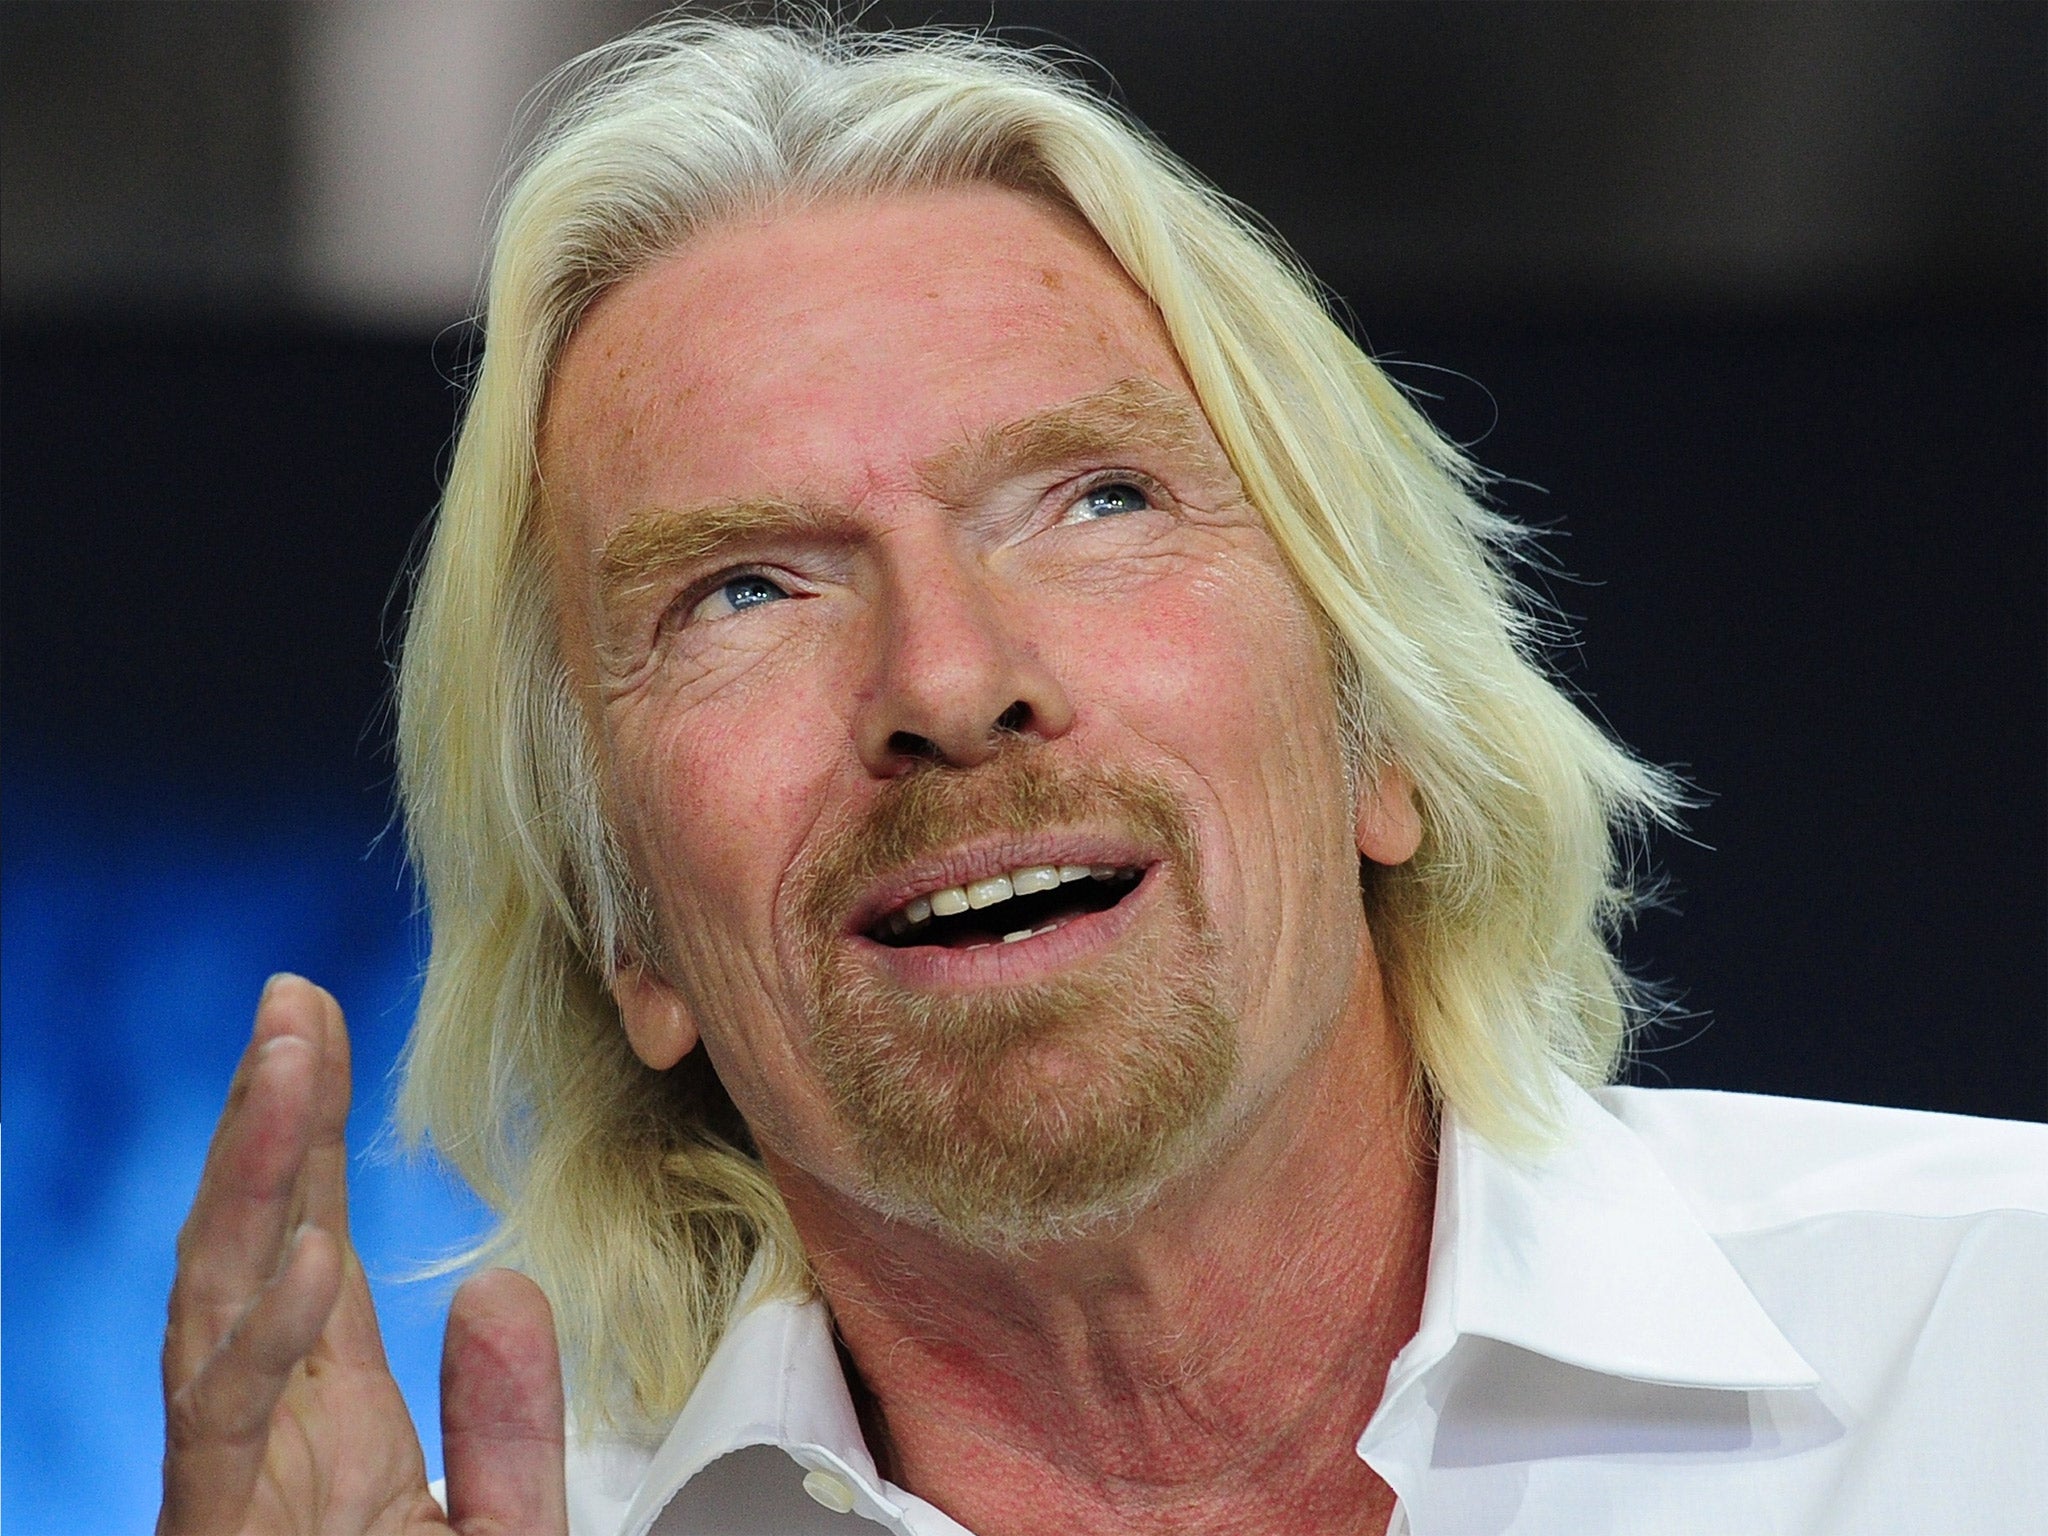 Sir Richard Branson has told his staff they can take as much holiday as they like